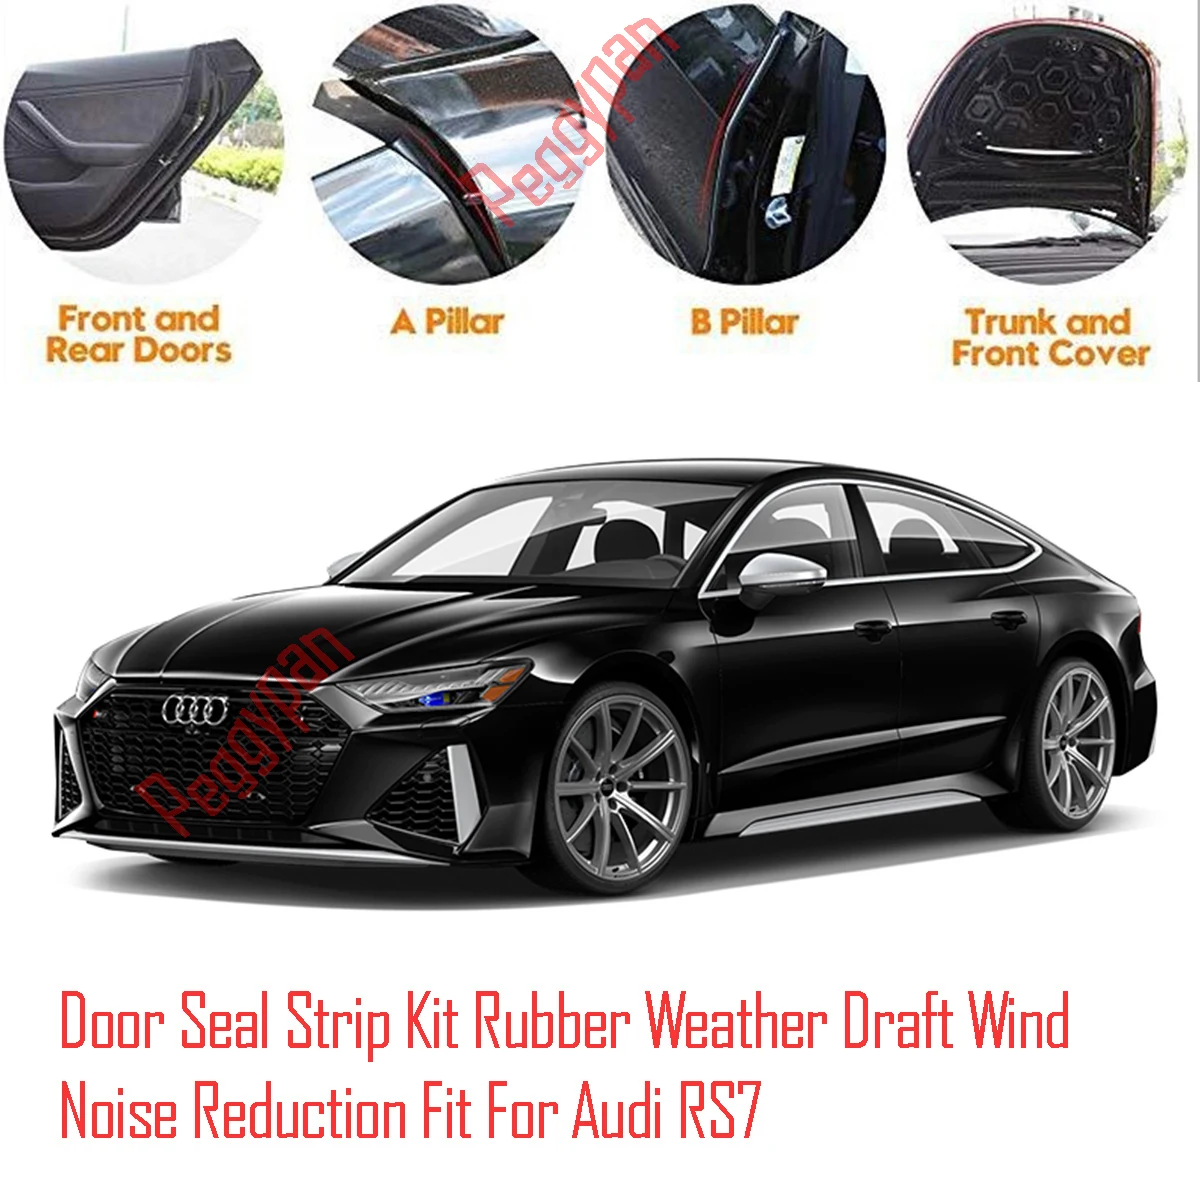 Door Seal Strip Kit Self Adhesive Window Engine Cover Soundproof Rubber Weather Draft Wind Noise Reduction Fit For Audi RS7